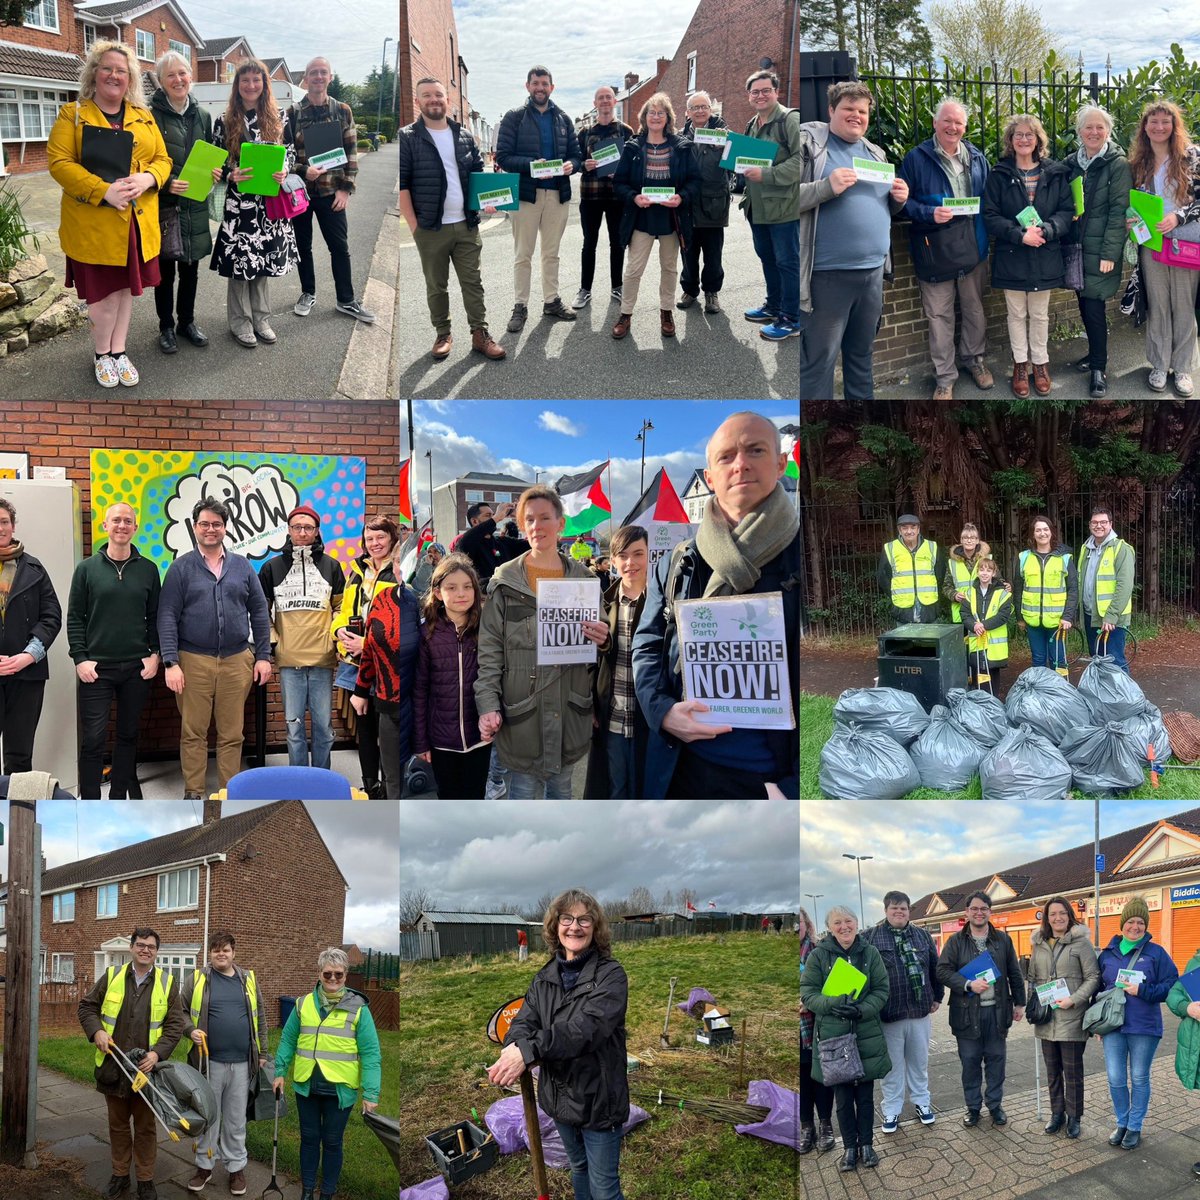 ⏳The countdown to the local elections is on!

💚 With only 1️⃣0️⃣ days to go, our candidates are out talking to residents right across the borough.

🗳 So wherever you live in #SouthTyneside, you can #VoteGreen on 2nd May.